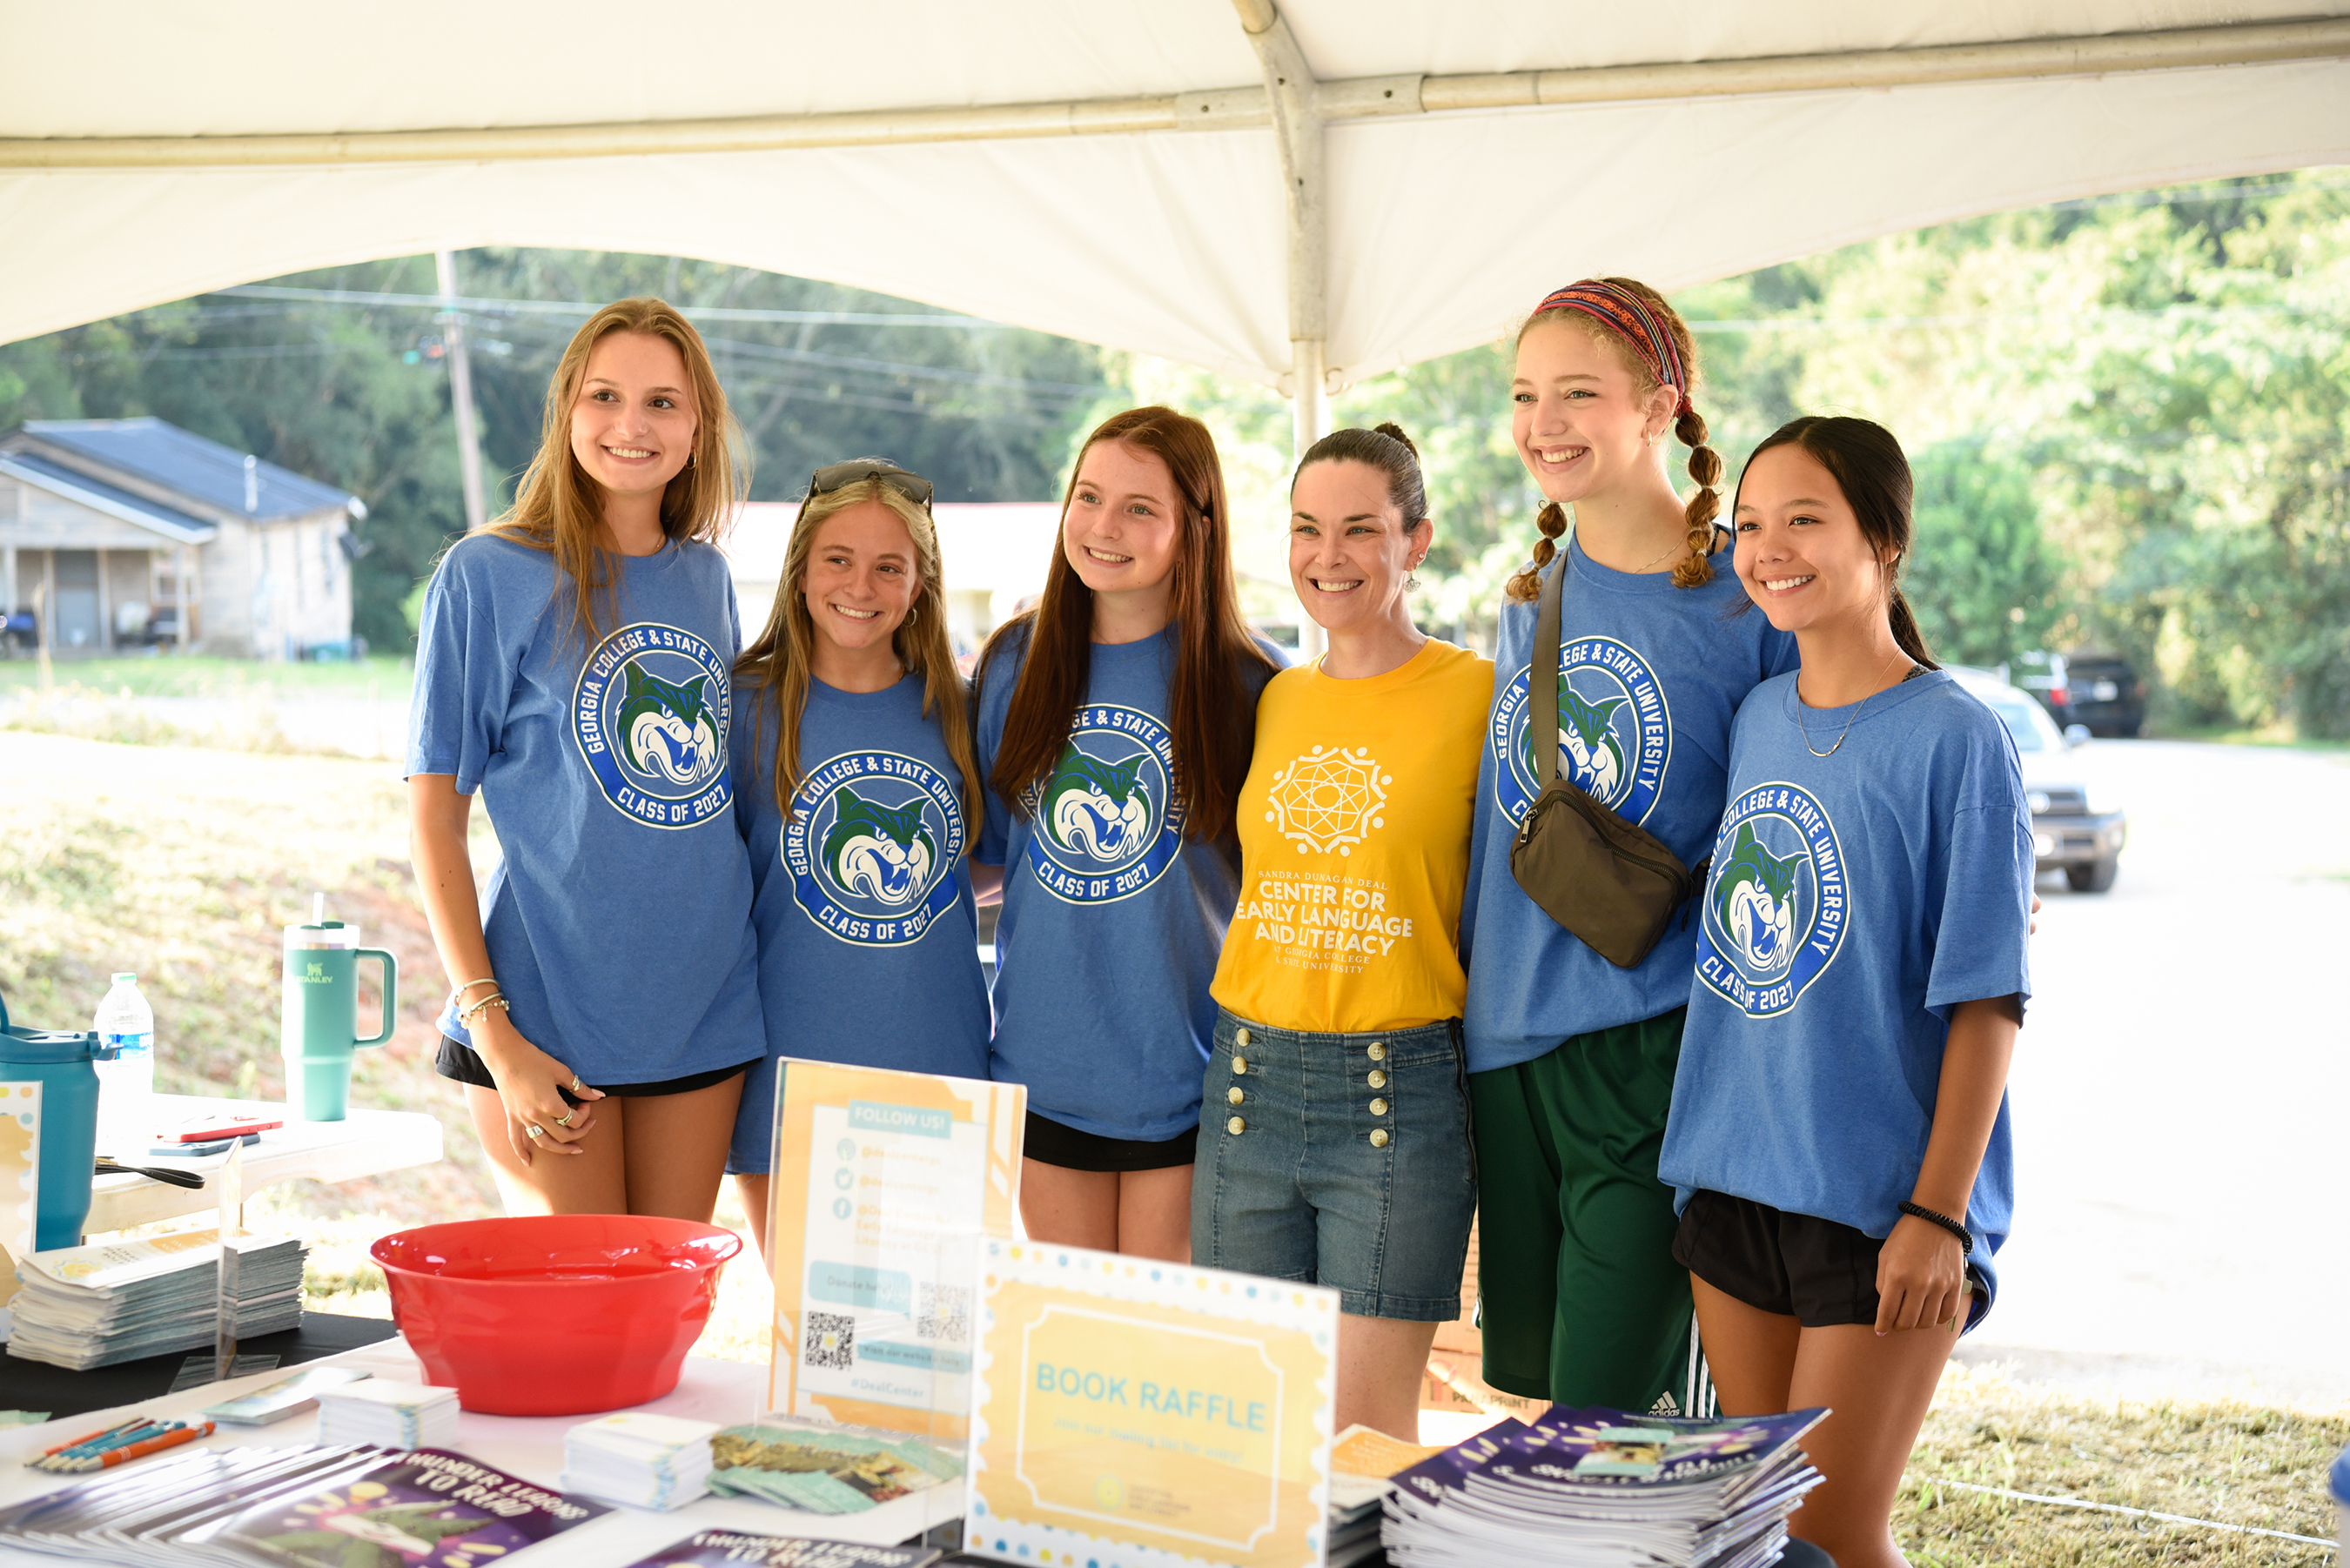 Students at book raffle table for GCSU Gives Day